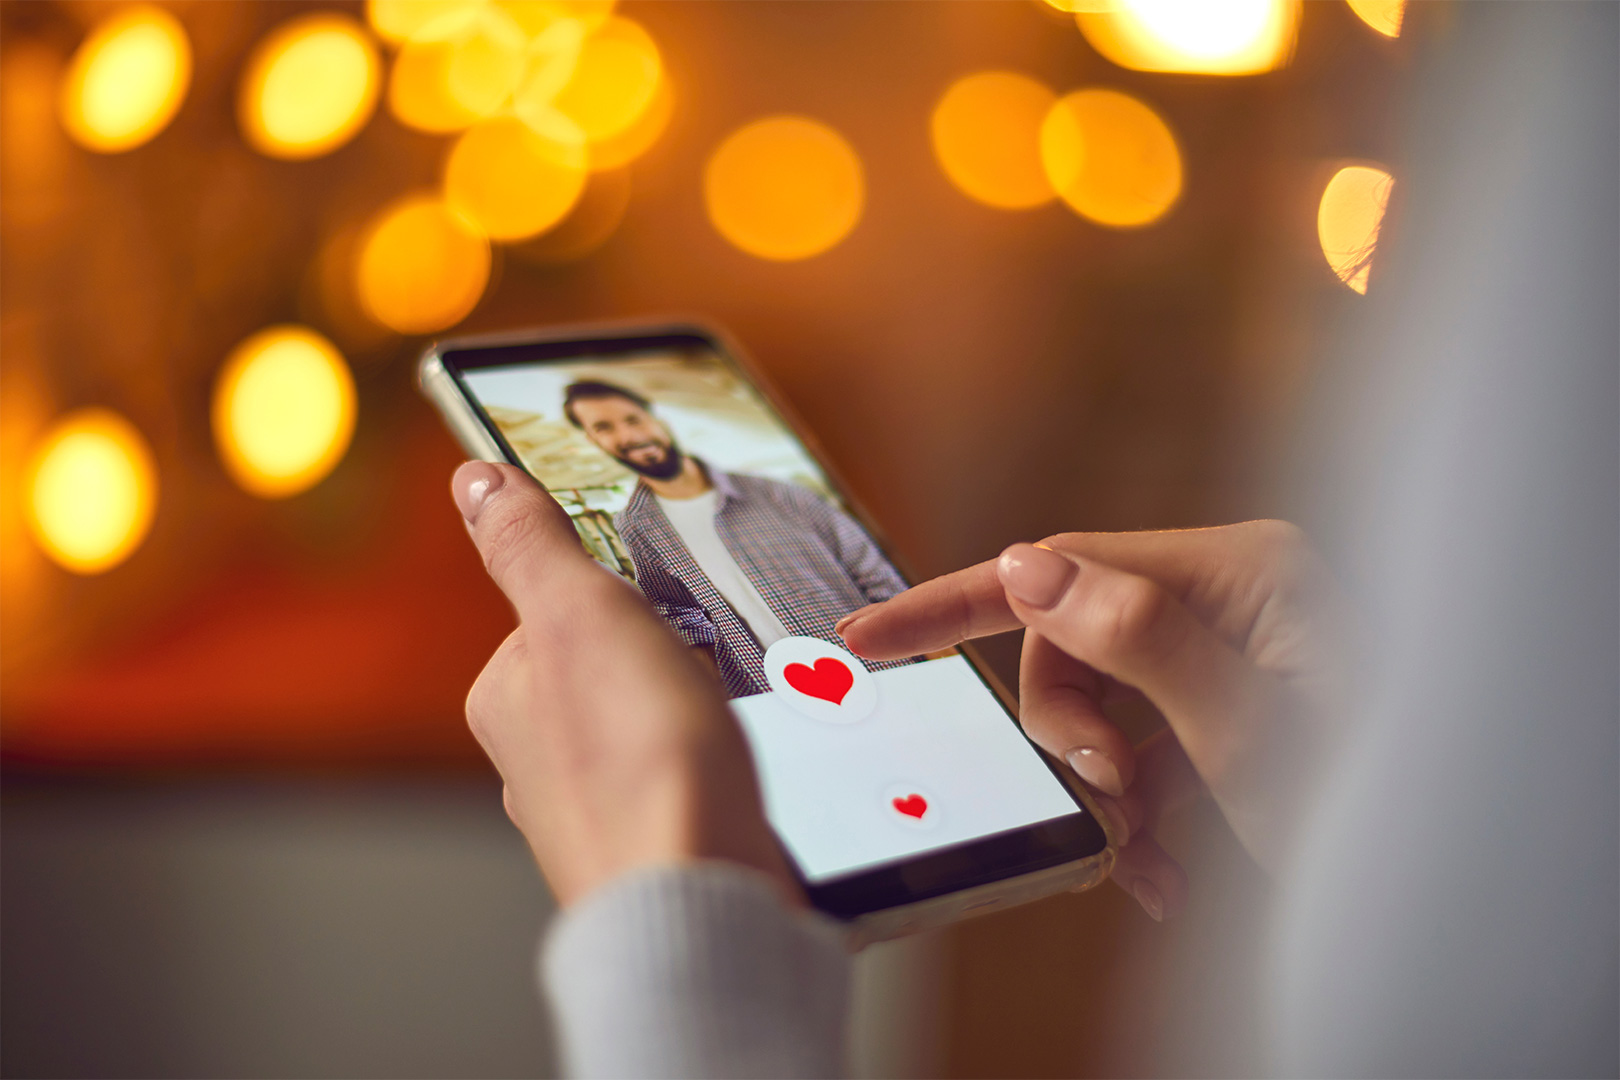 Knowing “Who Likes You” Changes the Online Dating Game